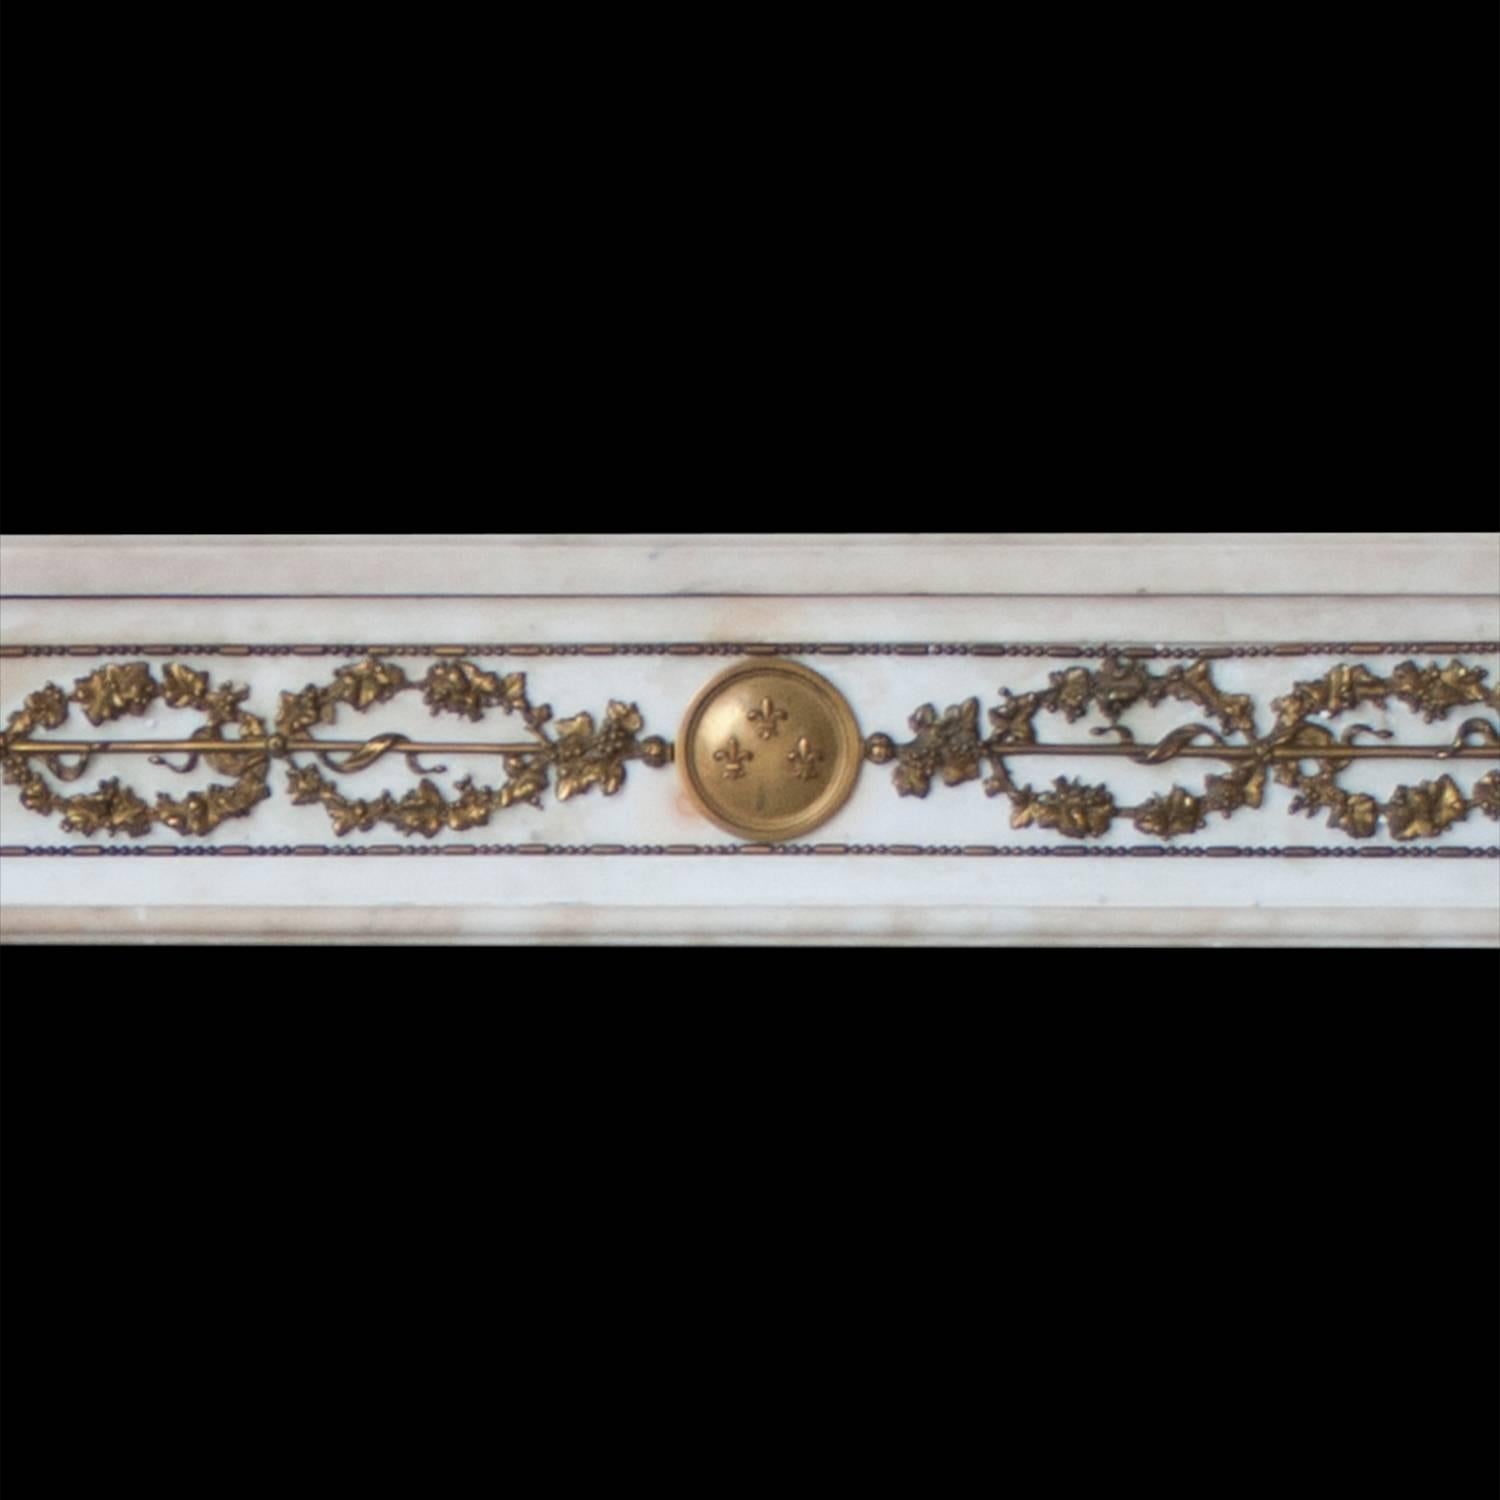 A French Empire style mantelpiece carved in Italian statuary marble with fine ormolu detailing.

Opening dimensions: 48 1/4